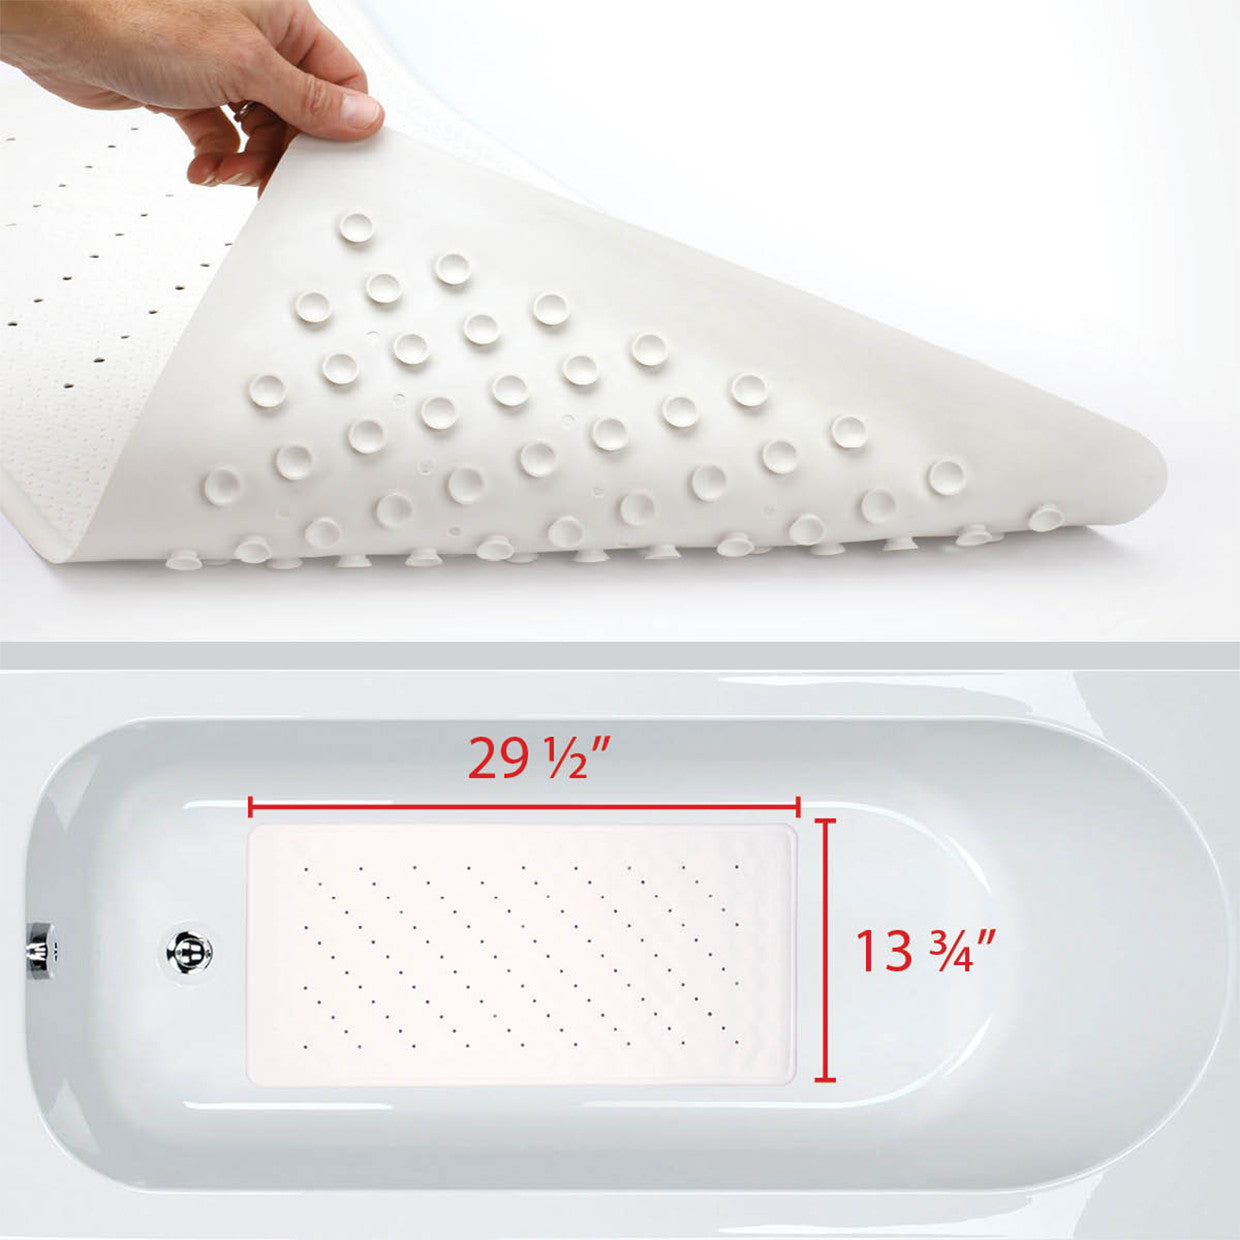 Luxury Bath Mat Shower Mat - Slip-Resistant, Anti-Bacterial, Non-Toxic  (29.5 x 13.75) | Latex Free, Mold and Mildew Resistant, Off White Almond